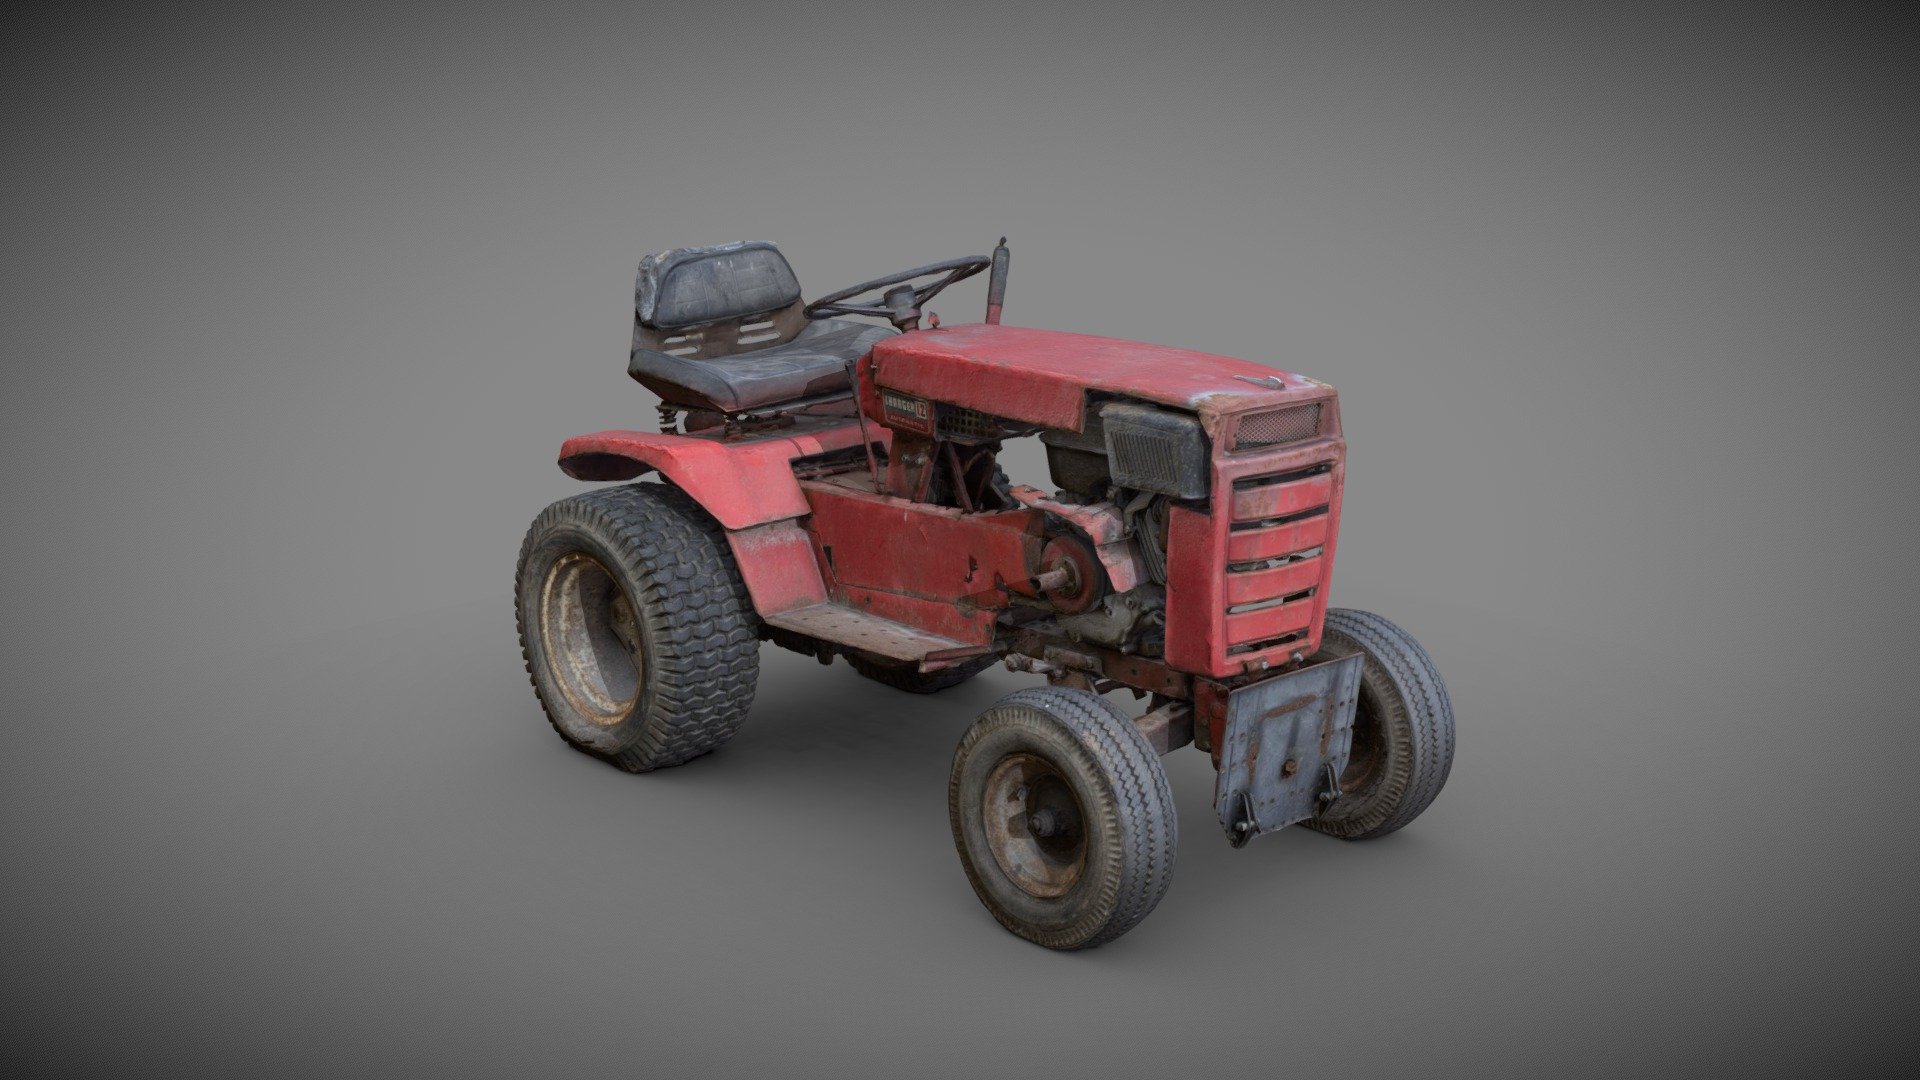 Photoscan of the red garden tractor &ldquo;Wheel Horse Charger 12